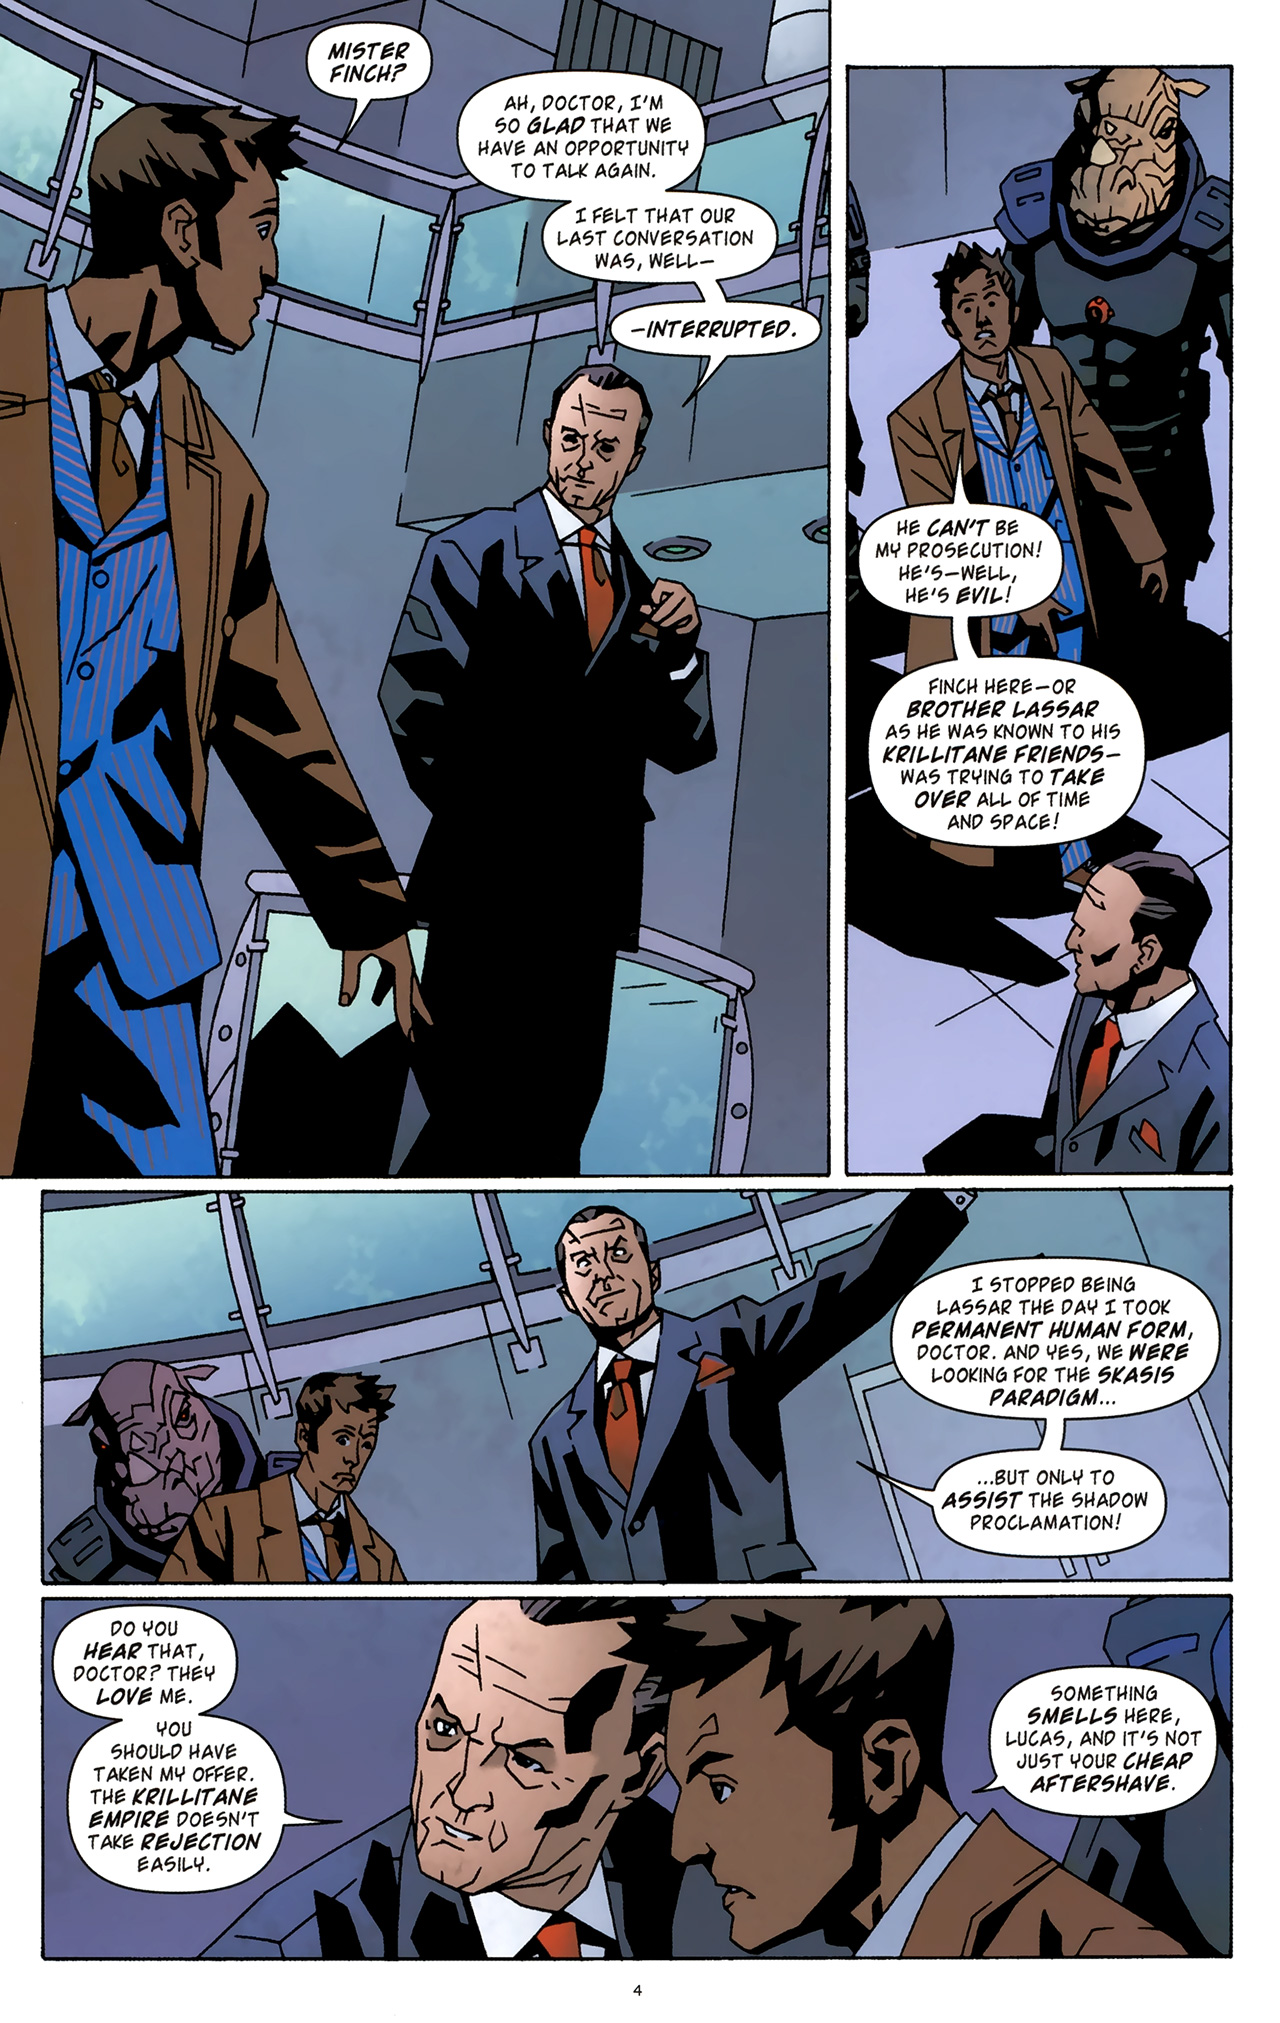 Doctor Who (2009) issue 3 - Page 6